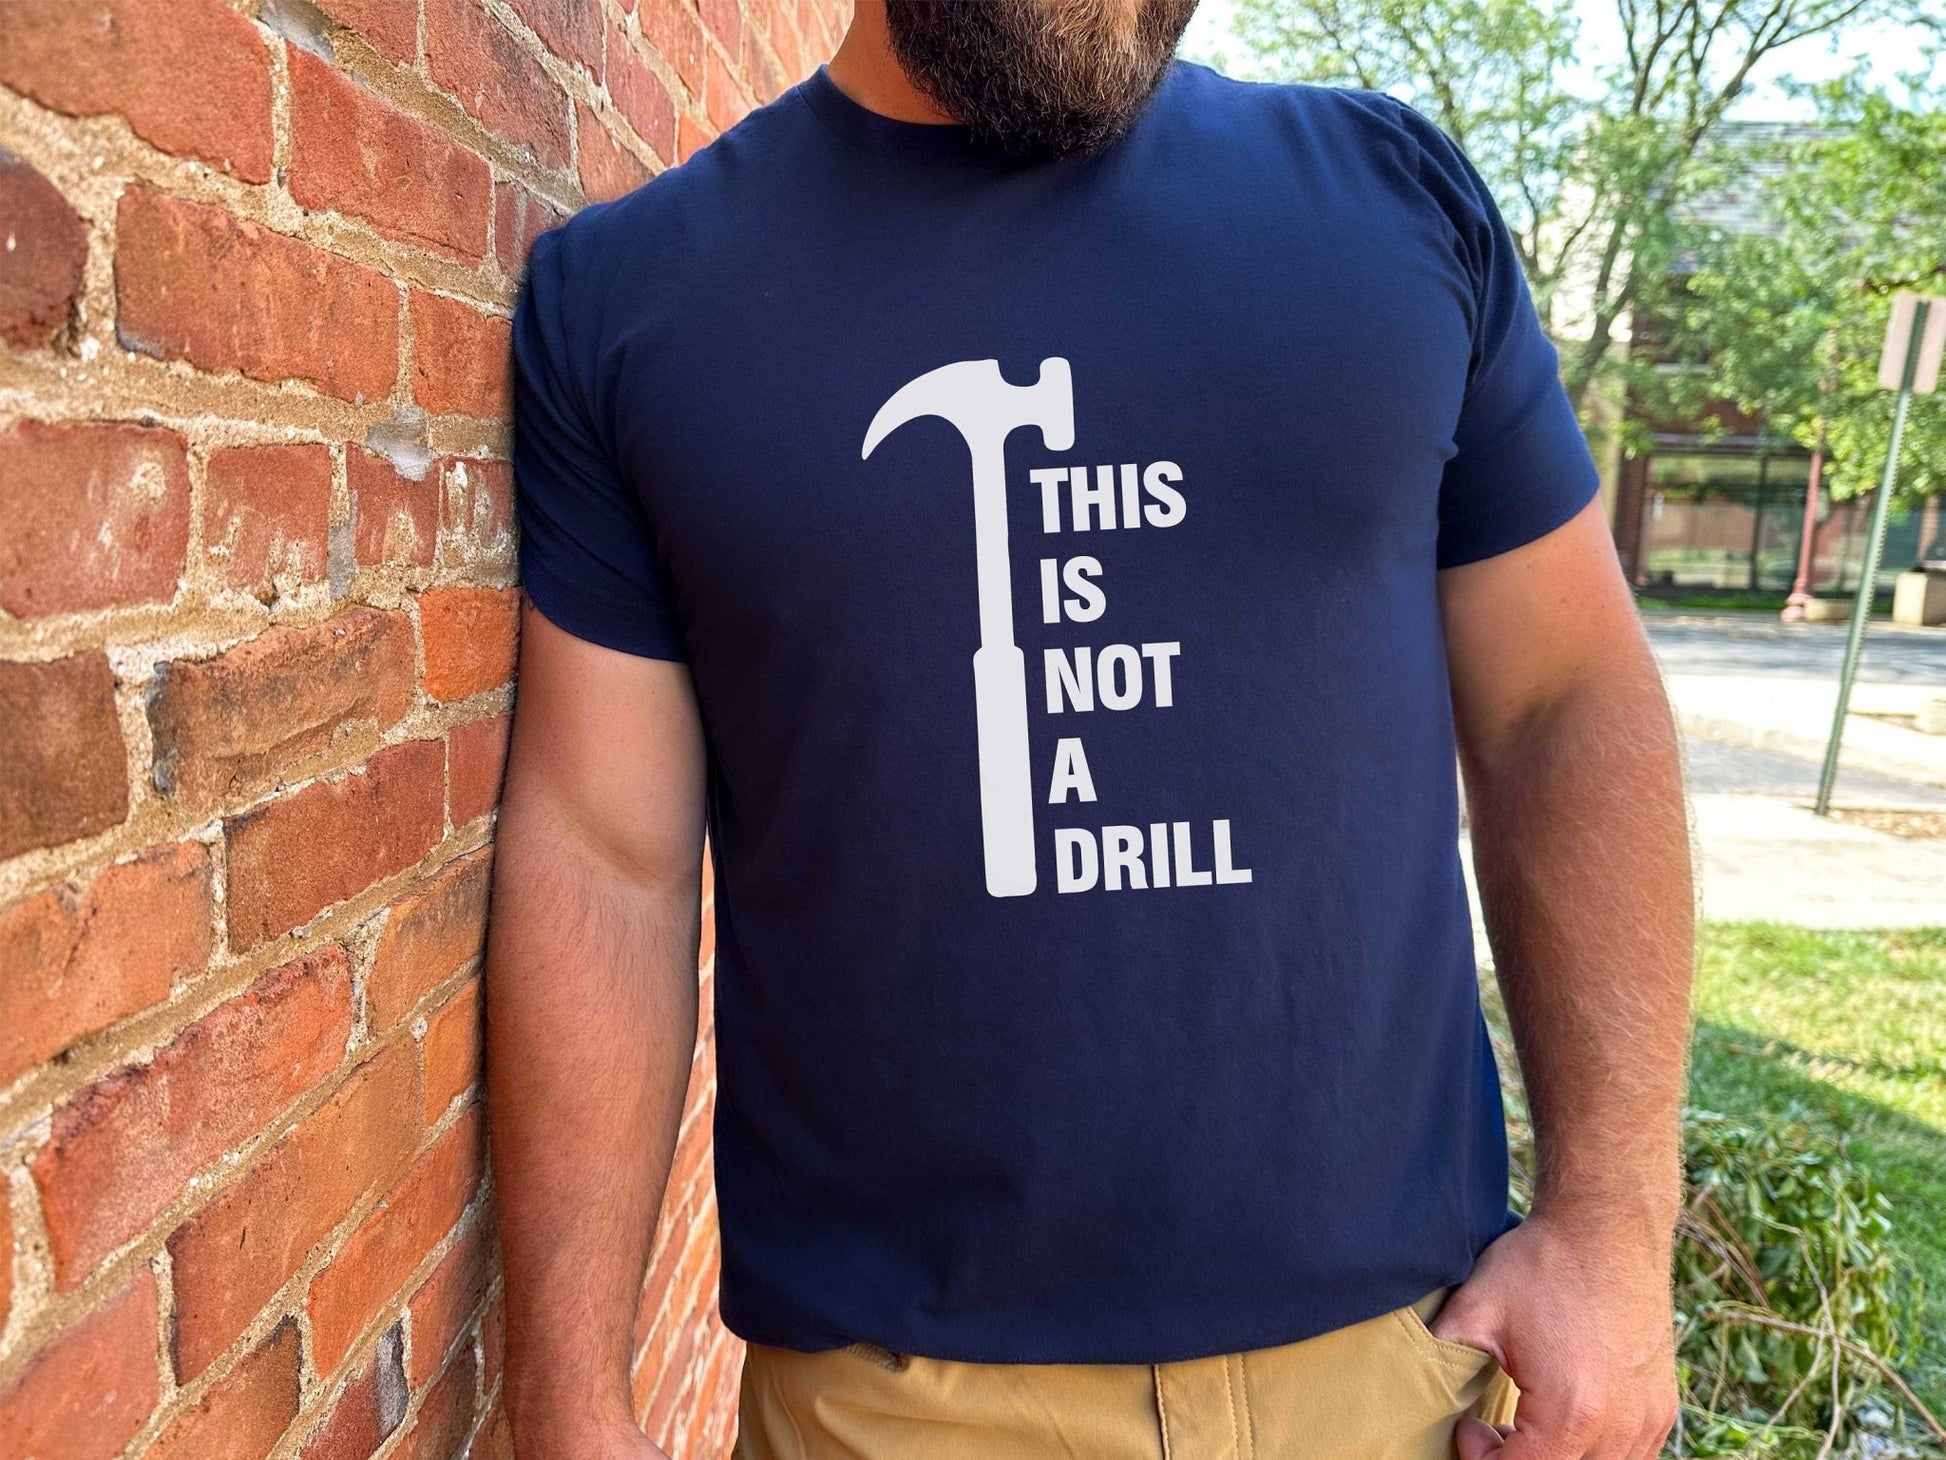 This Is Not A Drill Shirt, Dad Joke Shirt, Fathers Day Shirt, birthday gift for Dad, Handyman Shirt, Humor Carpenter Tee, plus size - SBS T Shop